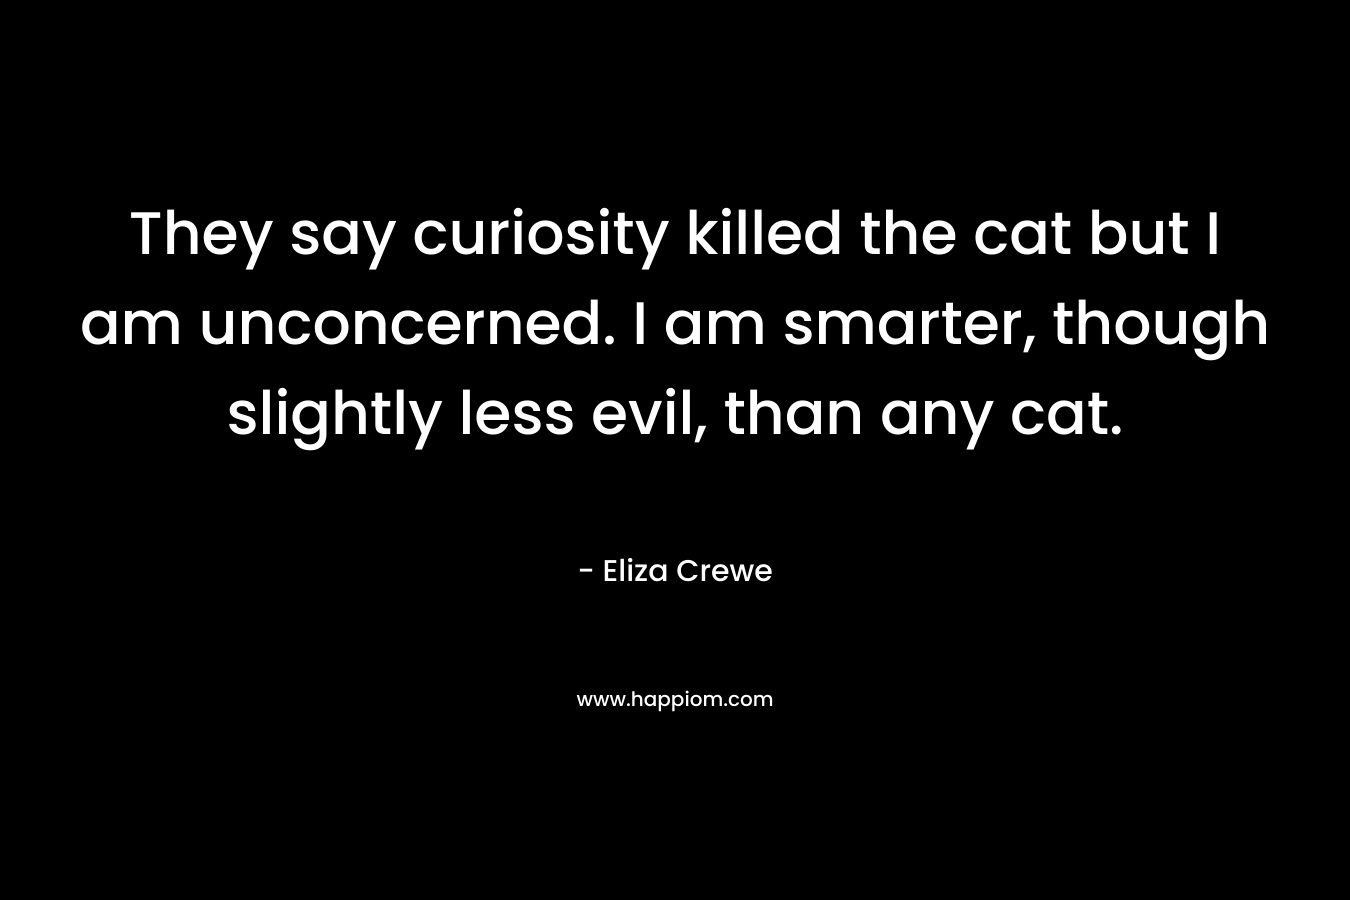 They say curiosity killed the cat but I am unconcerned. I am smarter, though slightly less evil, than any cat.